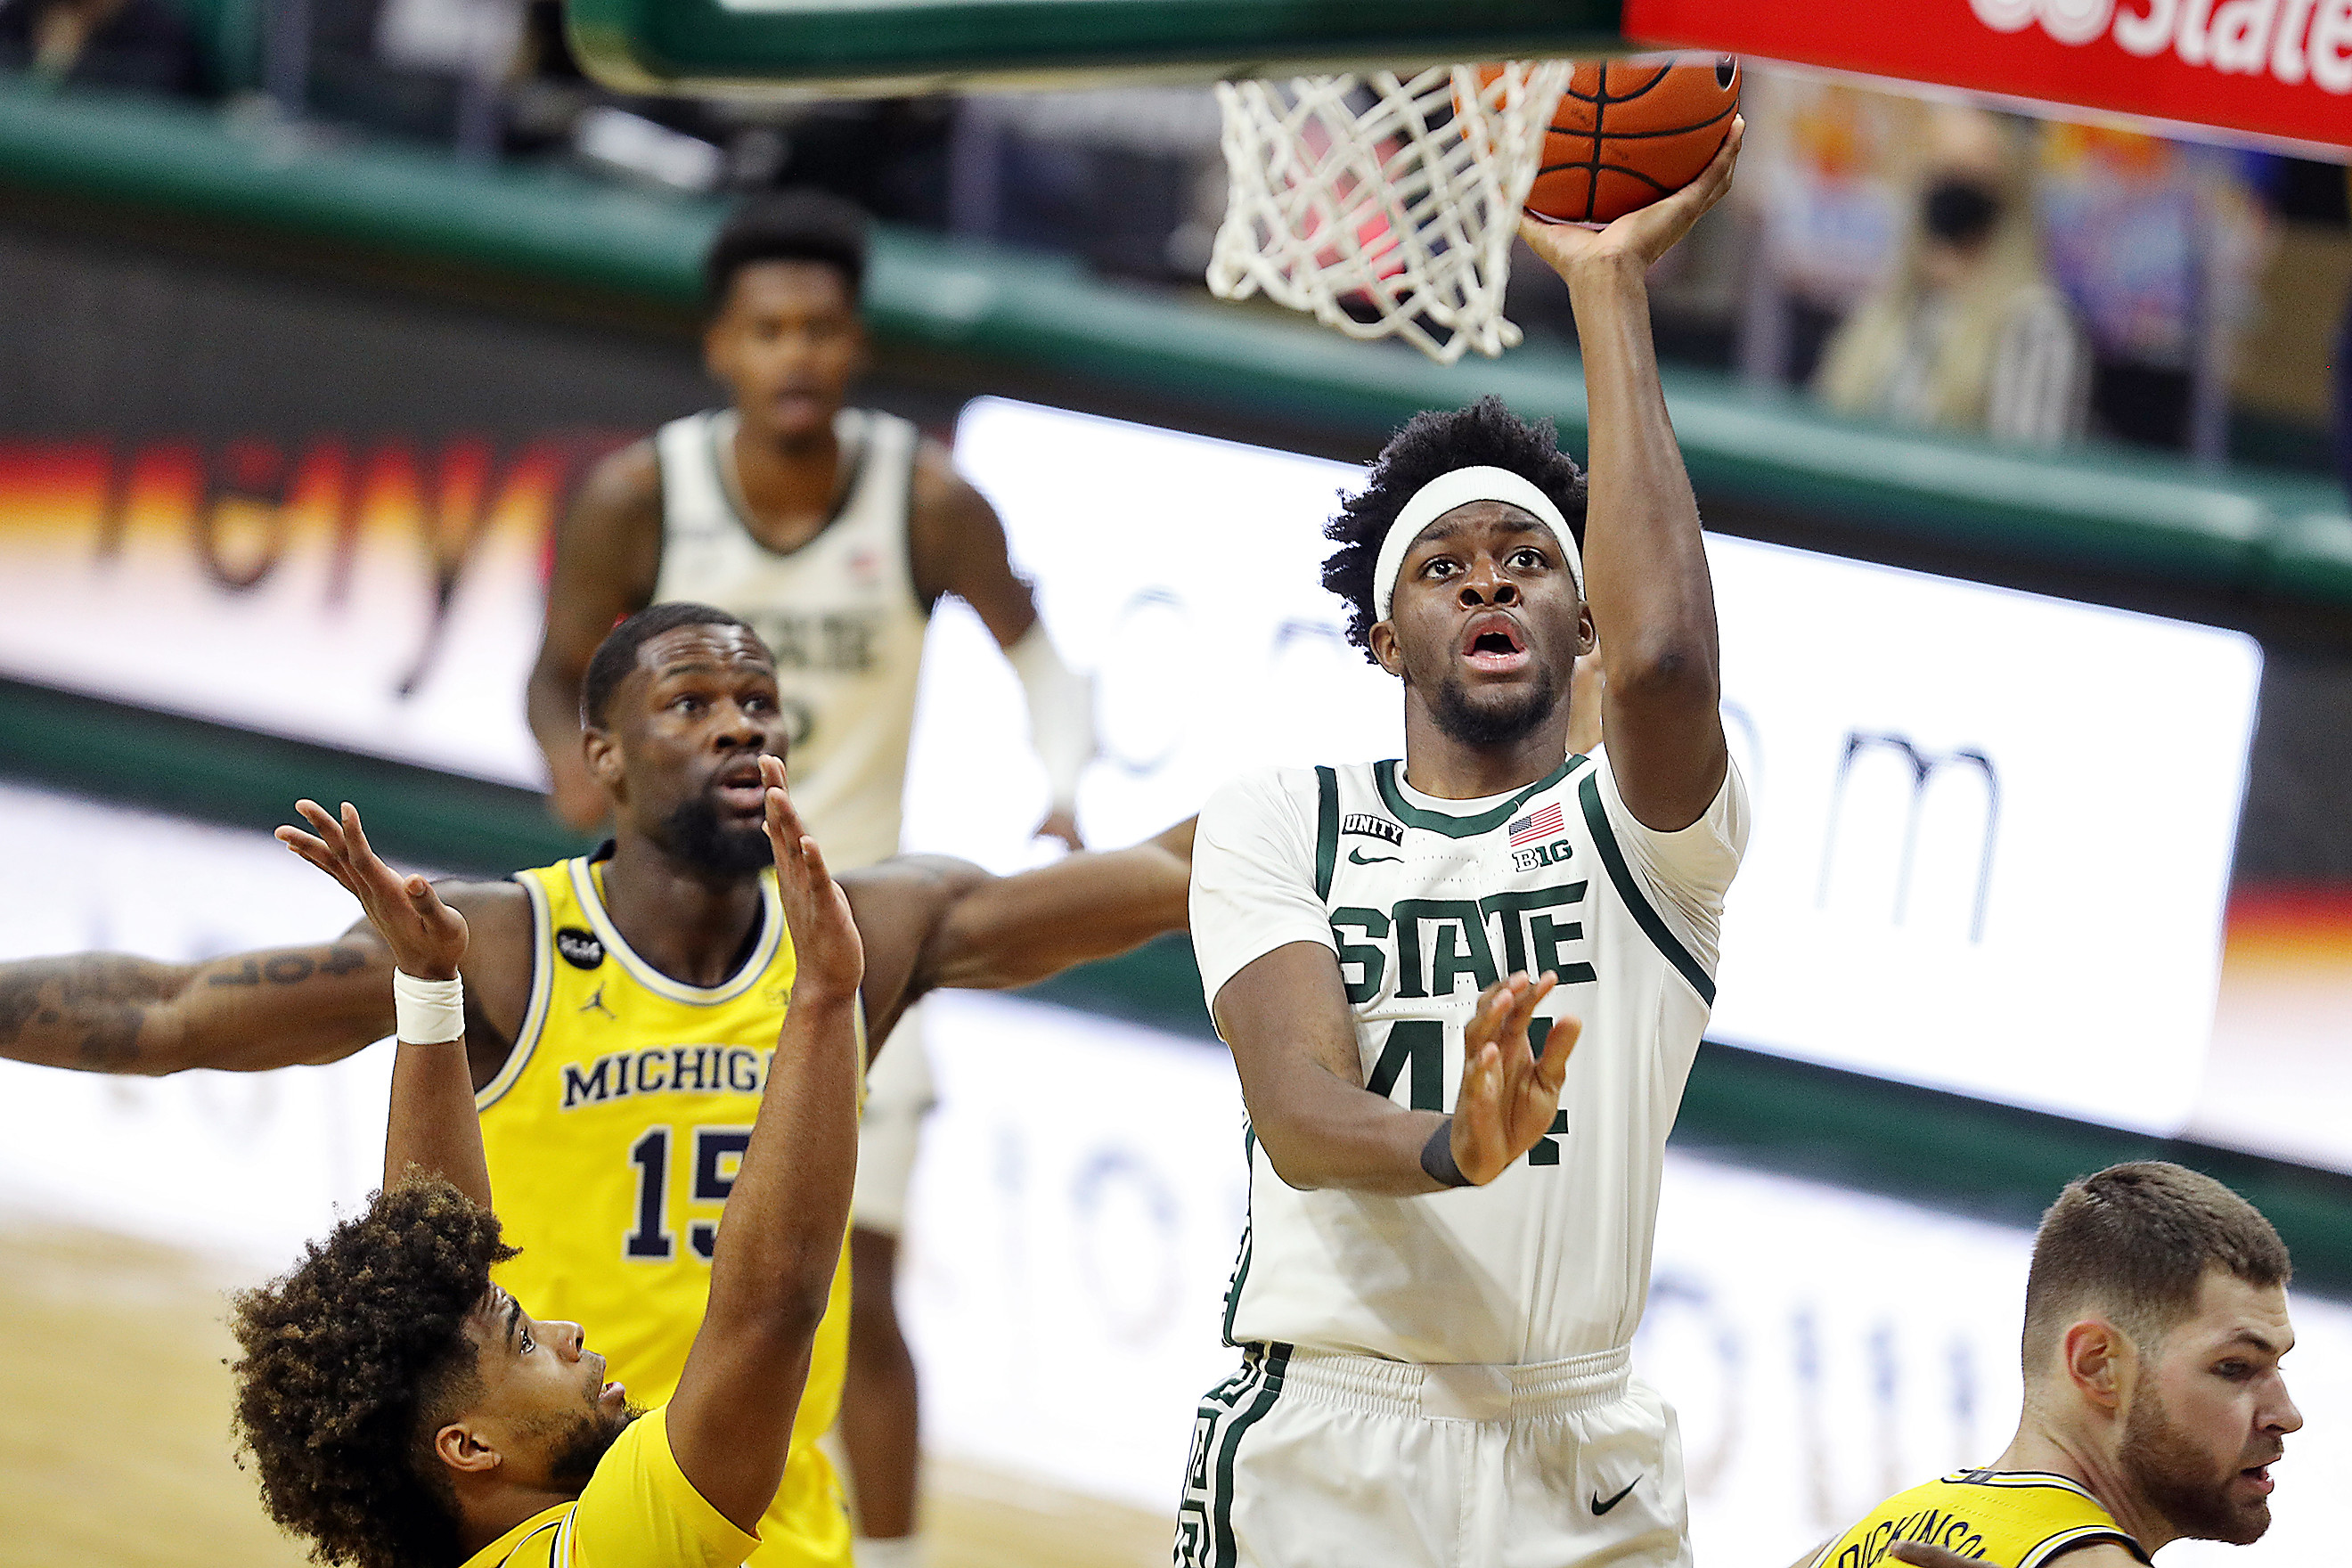 Msu 2022 Basketball Schedule What We Know About Michigan State's Schedule In 2021-22 - Mlive.com